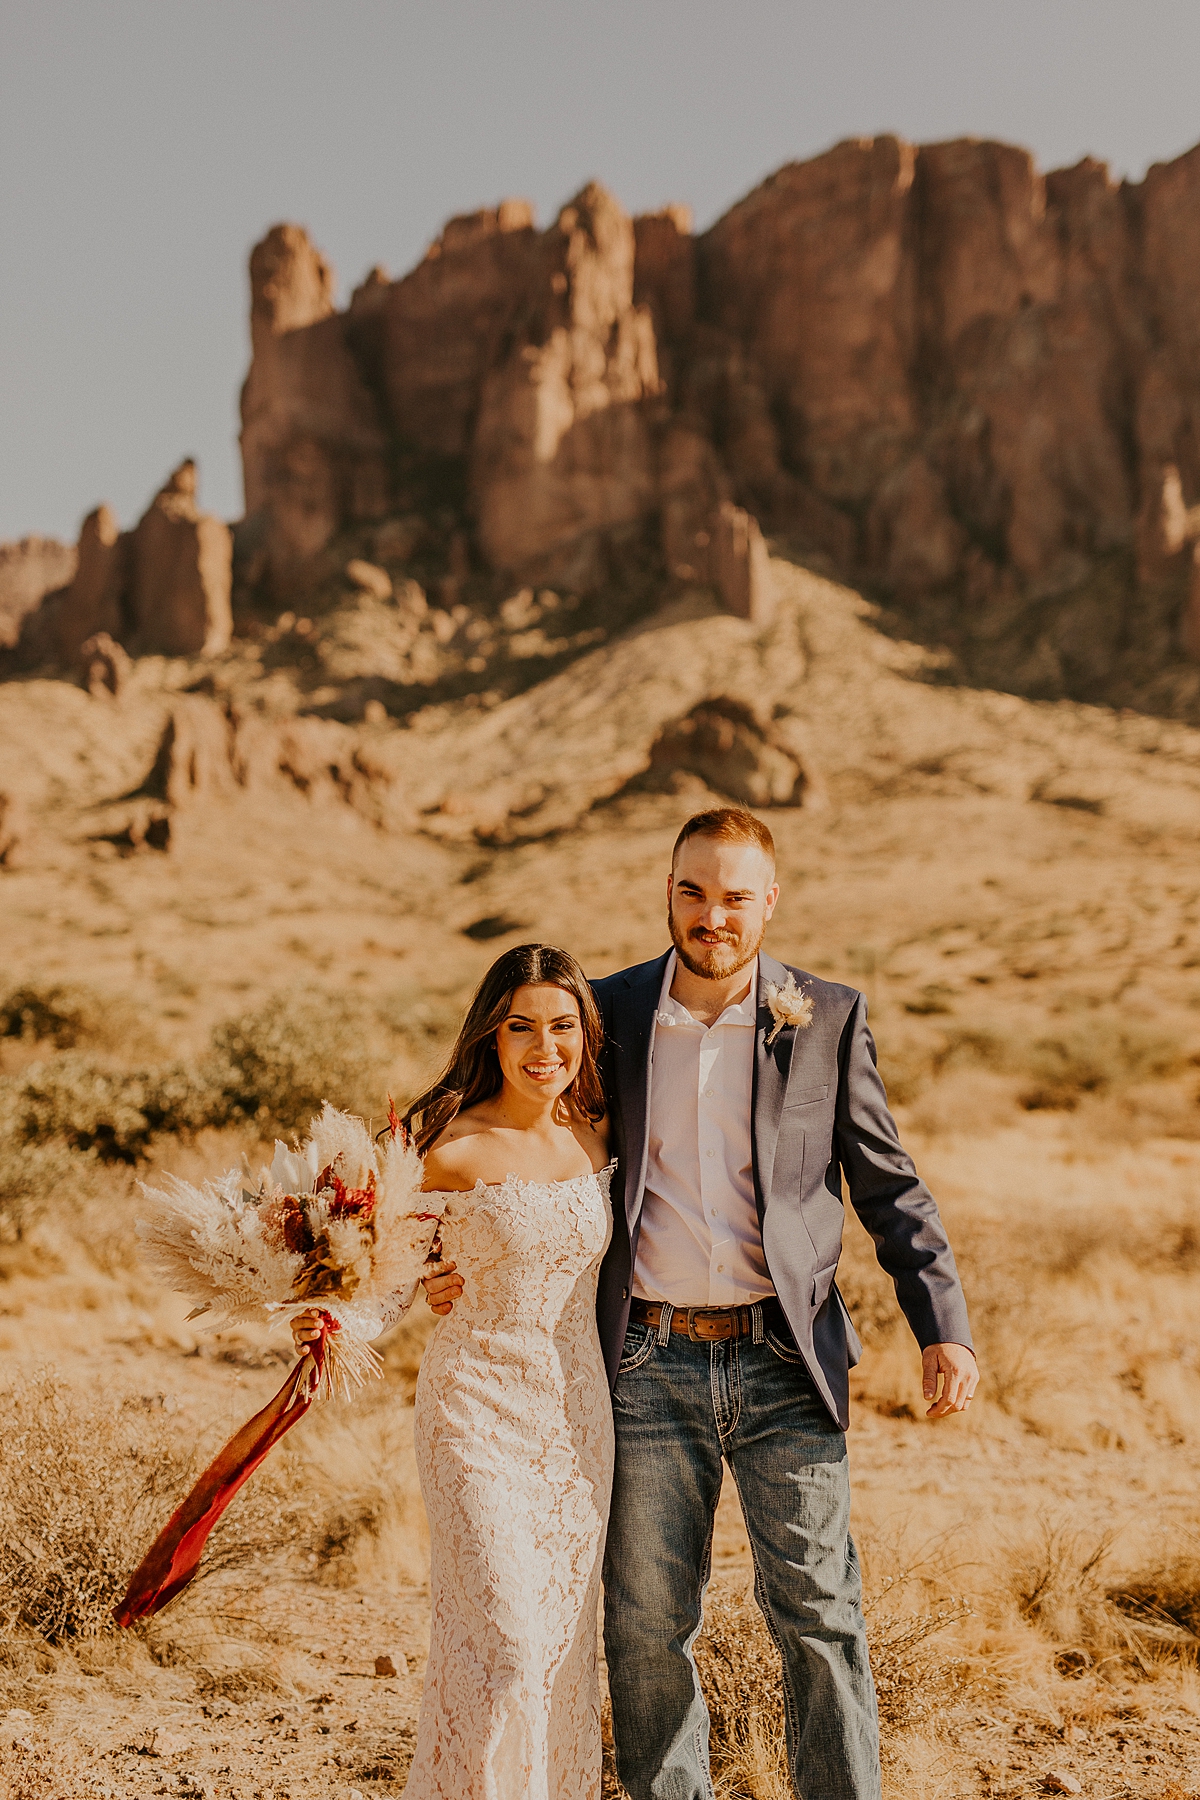 Intimate-elopement-in-superstition-mountain-wilderness-allison-slater-photography35.jpg